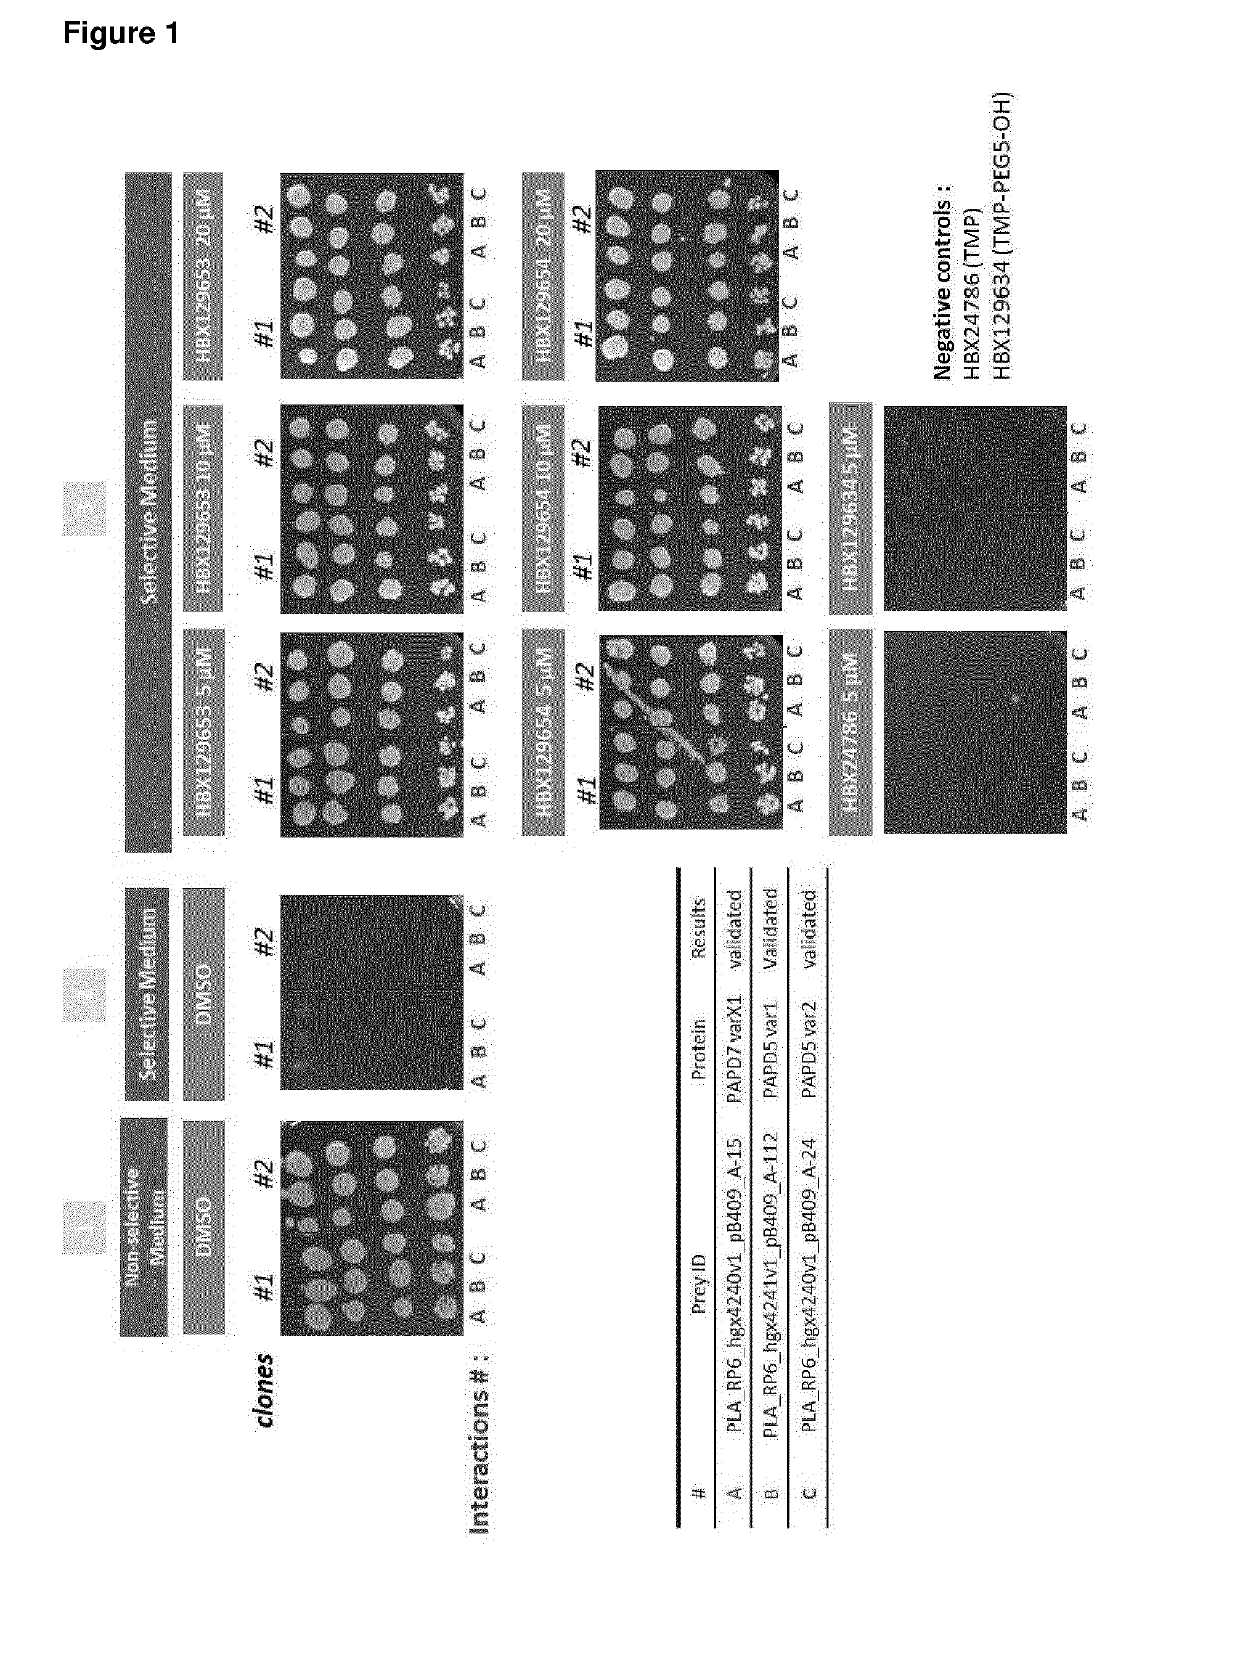 Nucleic acid molecules for reduction of papd5 or papd7 mRNA for treating hepatitis b infection